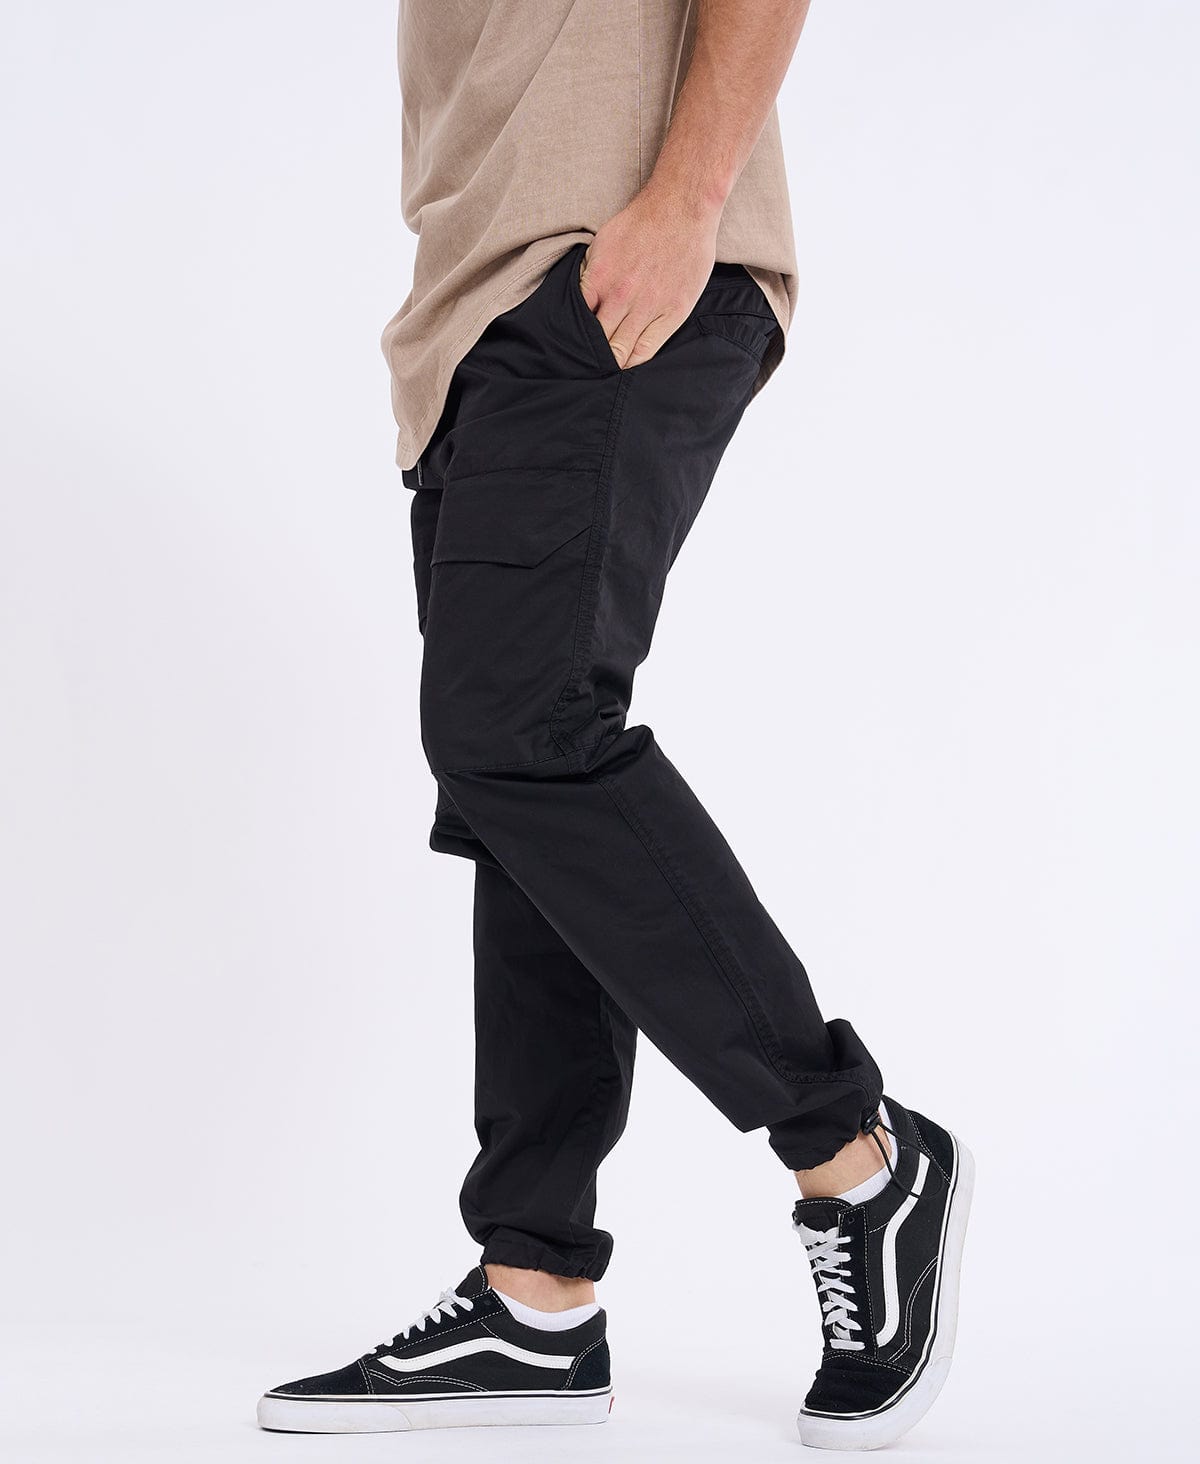 Overland Cargo Pants Charcoal – Neverland Store